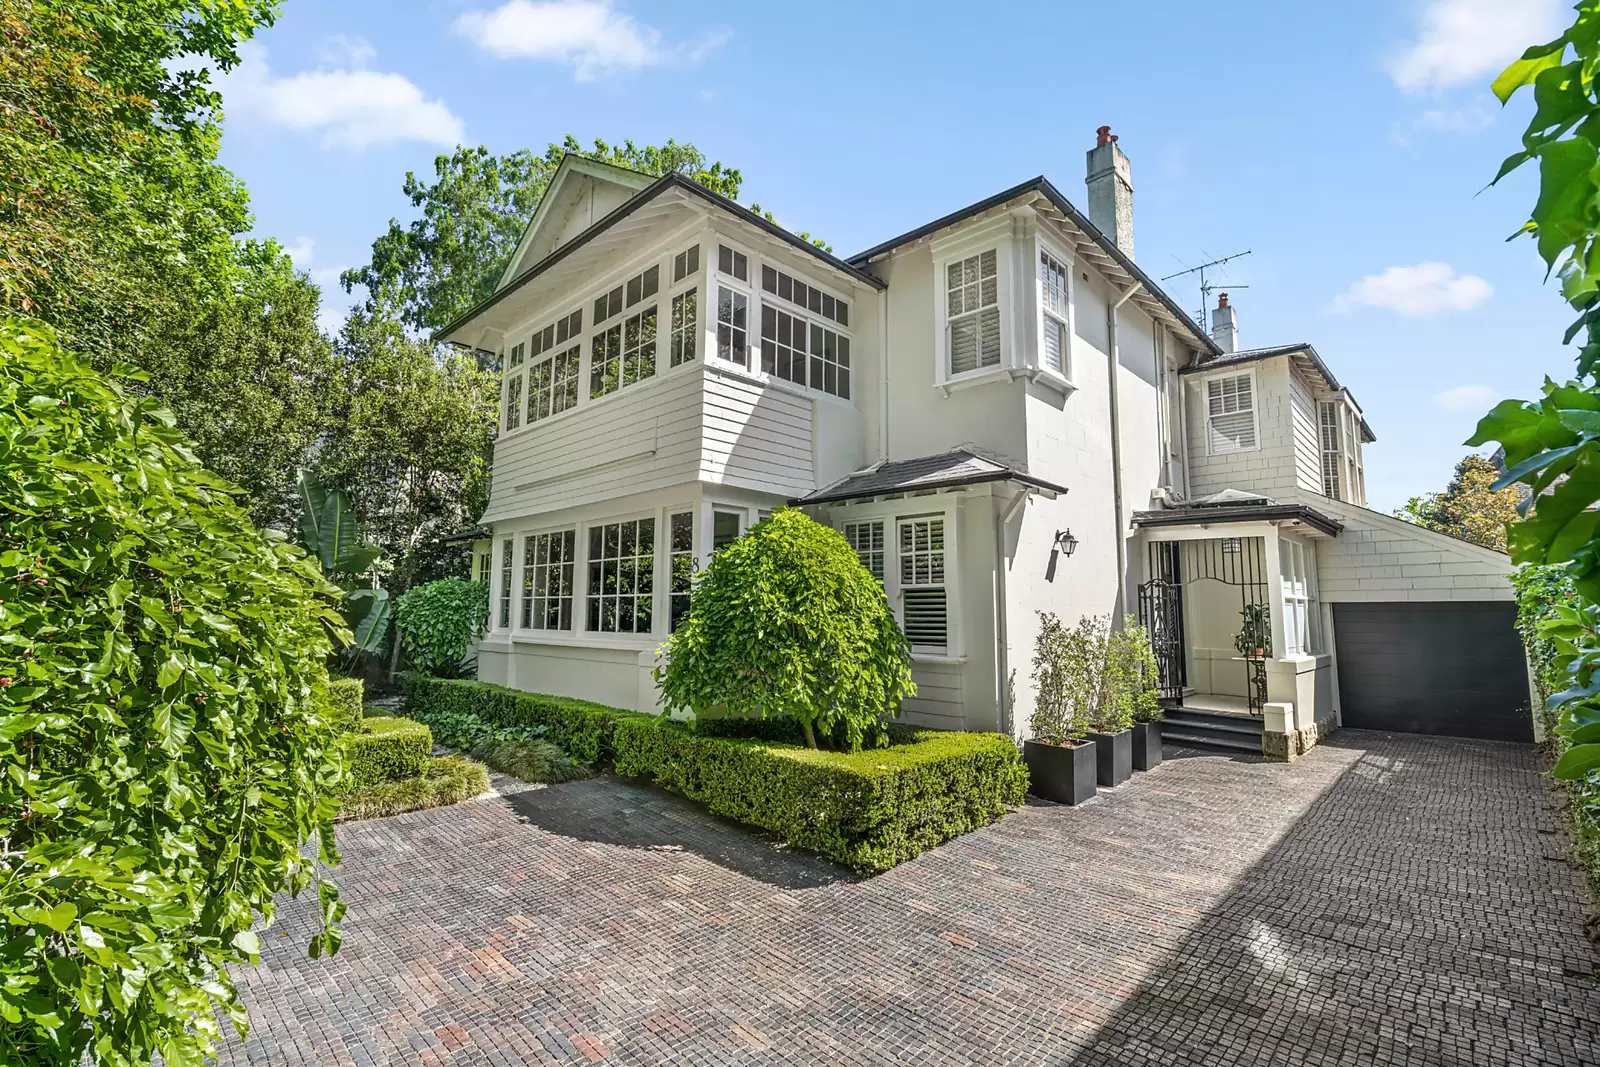 Photo #12: 8 Rosemont Avenue, Woollahra - For Sale by Sydney Sotheby's International Realty